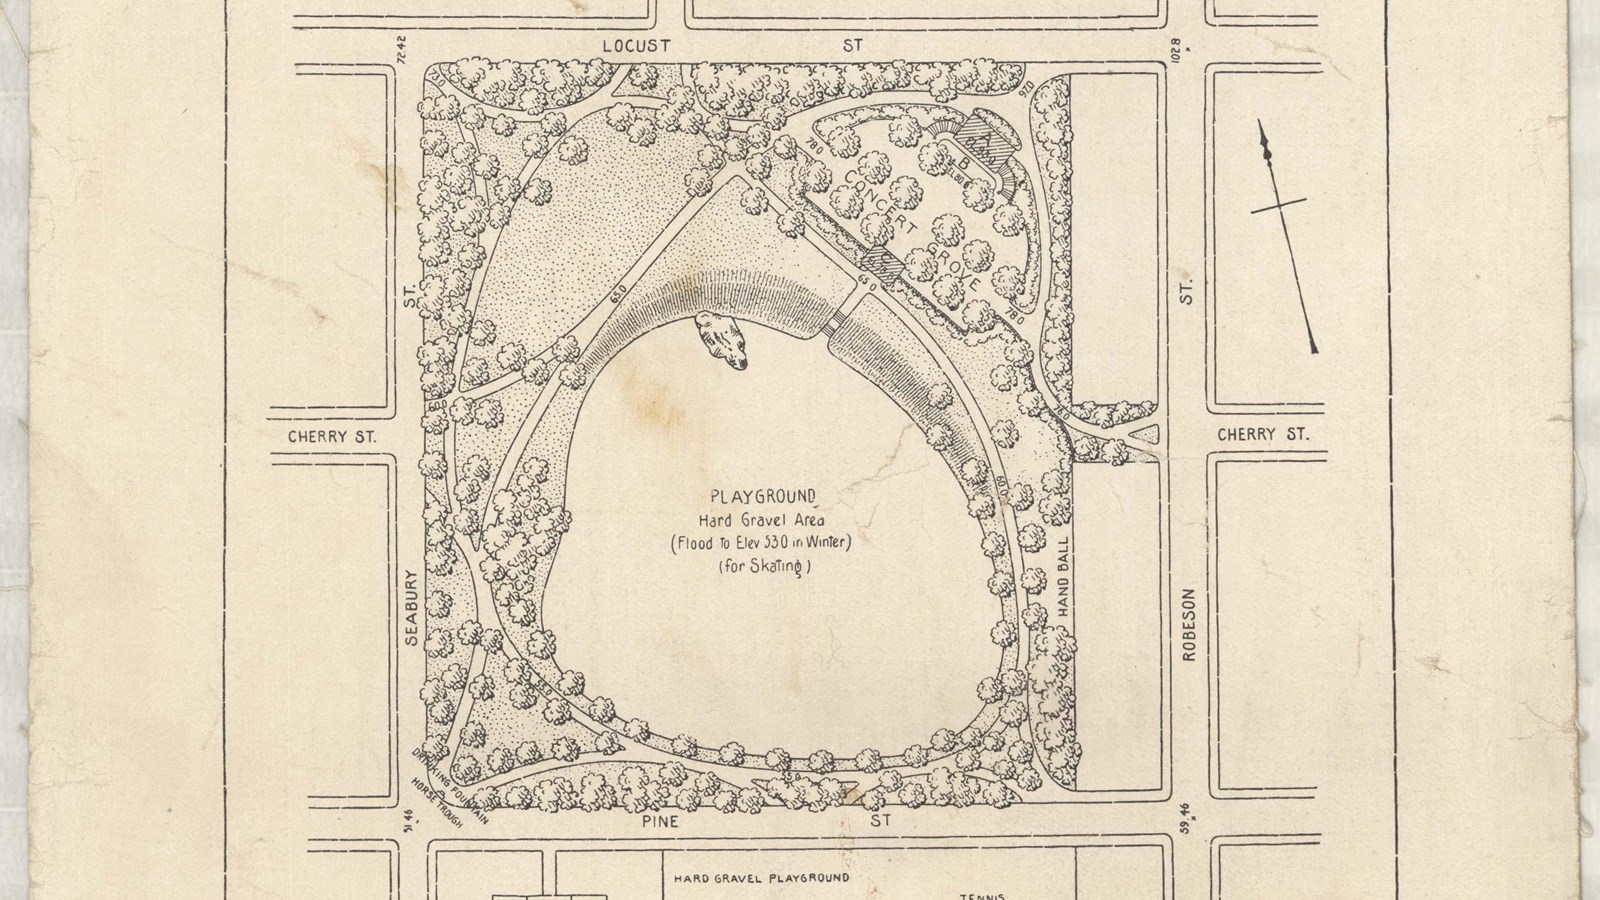 Plan of rectangular park with large open circular area with curving paths and lots of trees 